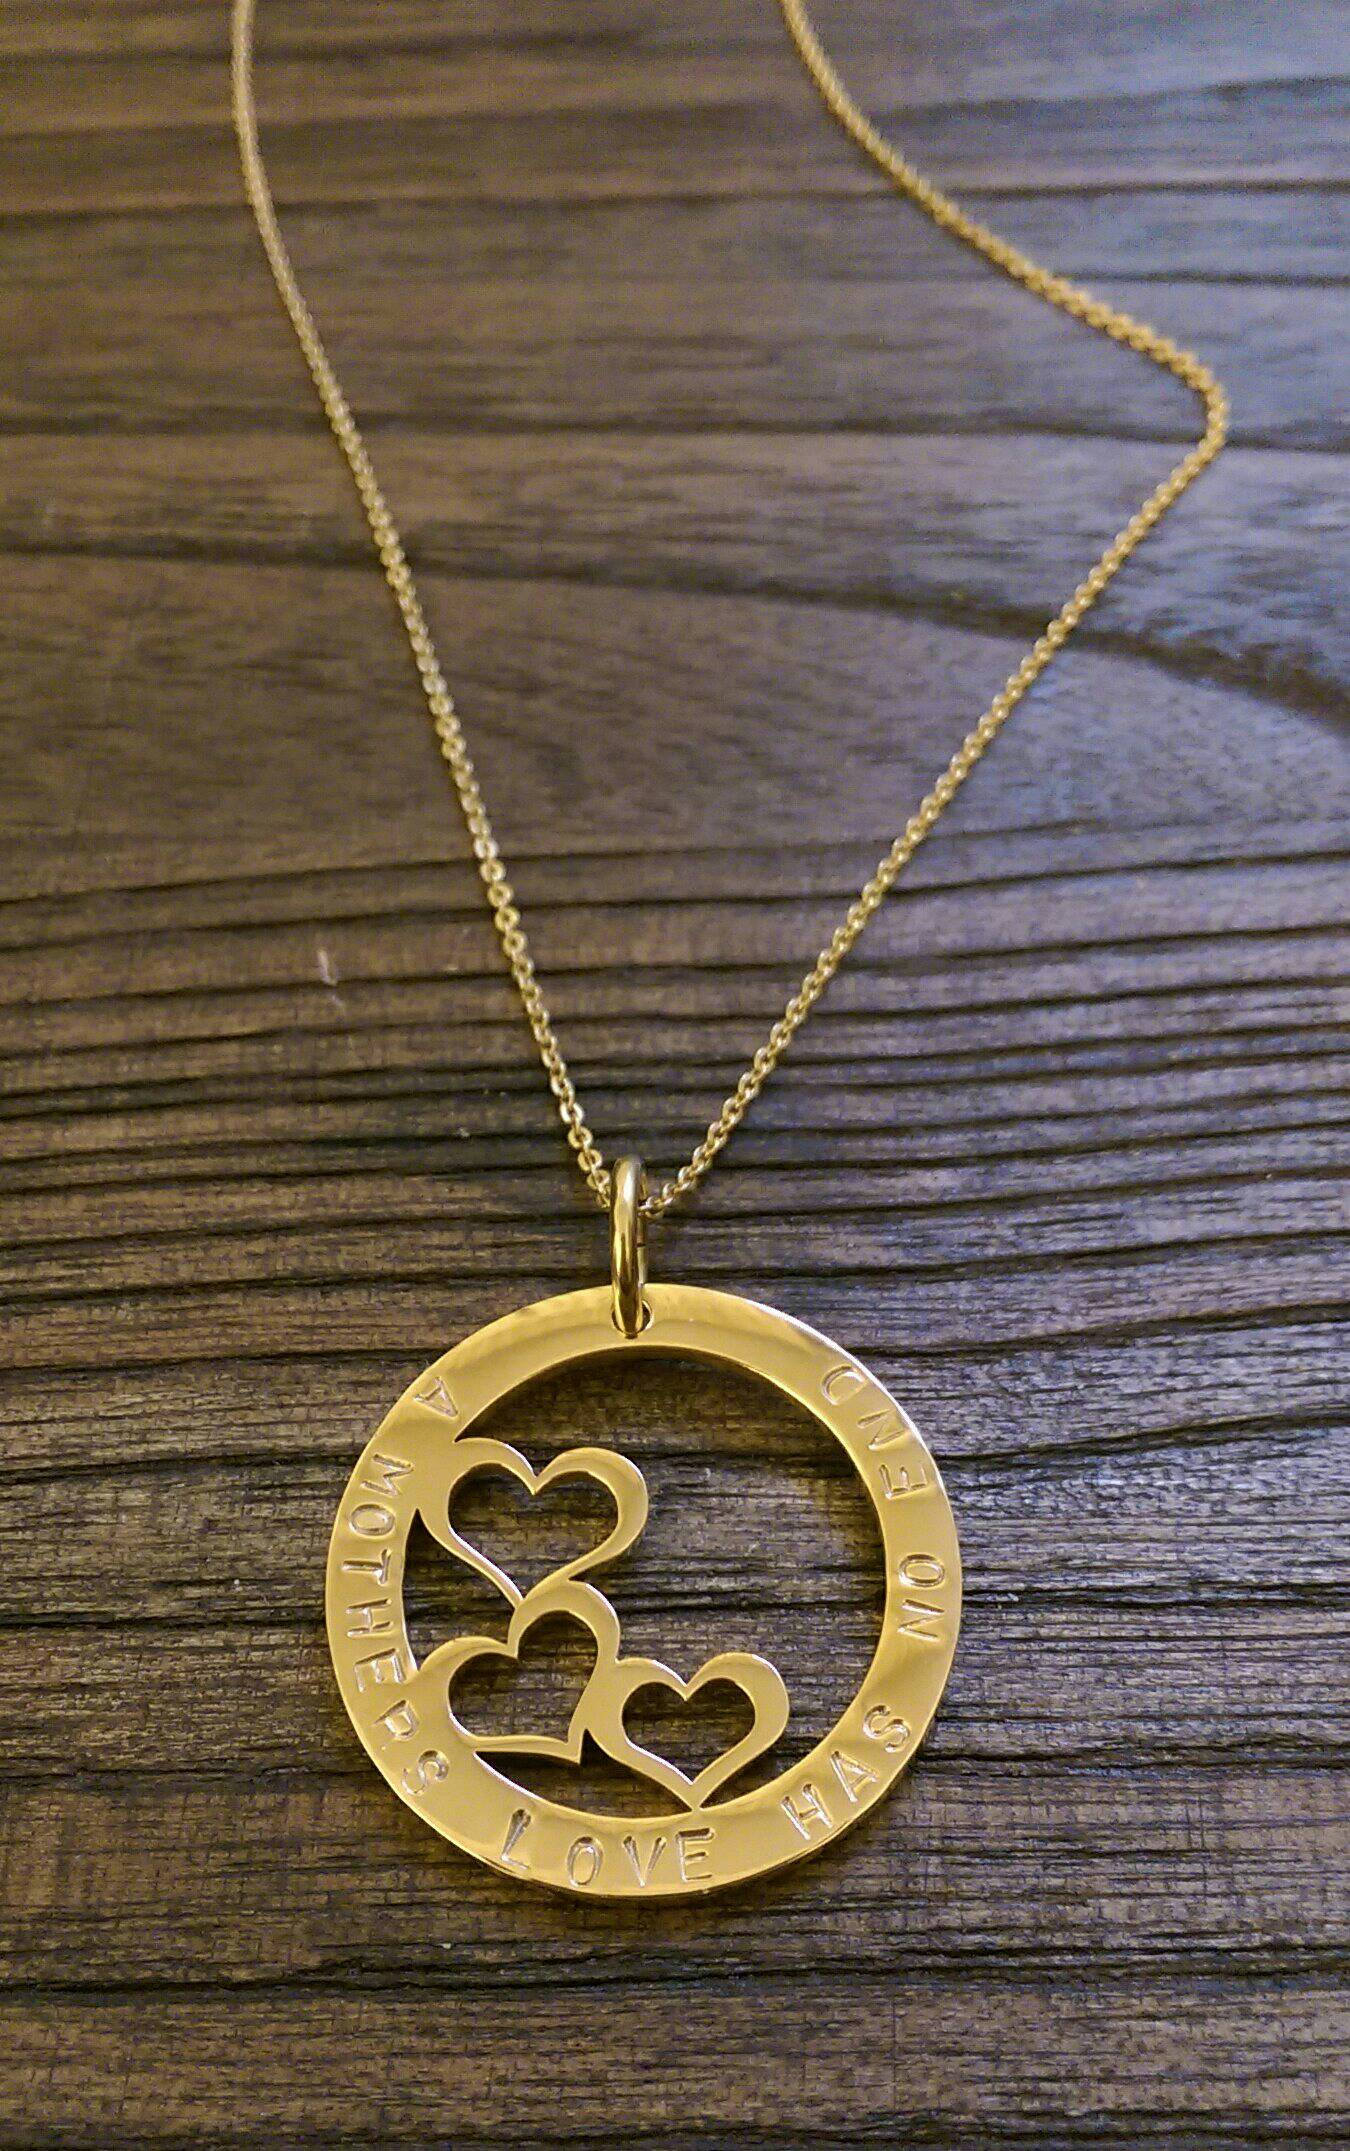 Stainless Steel Gold Personalised Hand Stamped Triple Heart Design Circle Necklace 32mm "A Mothers love has no end" Made ready to post.